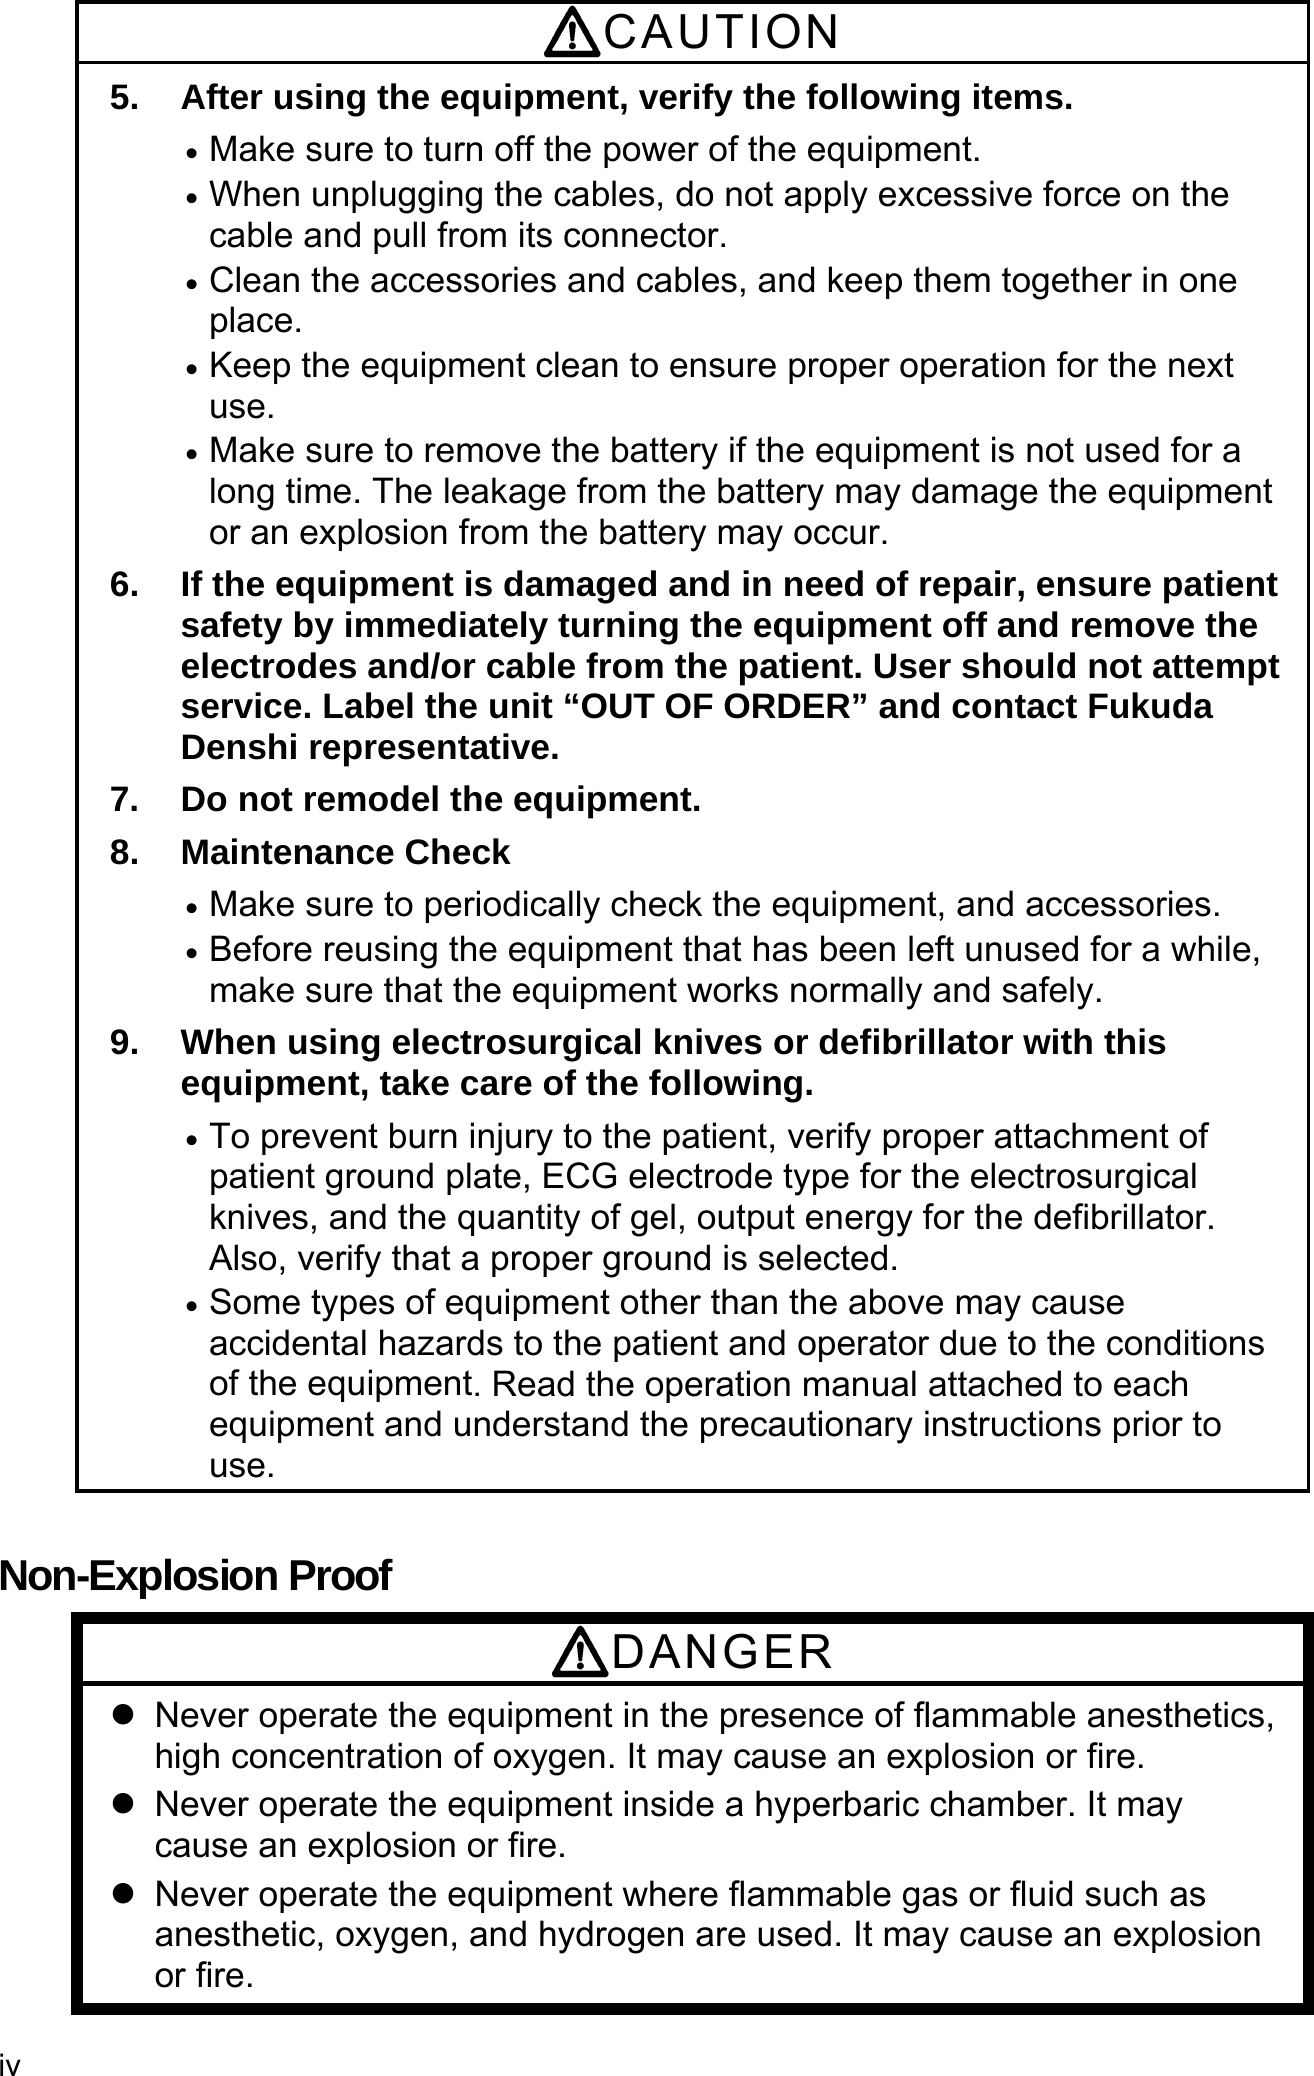 iv  CAUTION 5.  After using the equipment, verify the following items.  Make sure to turn off the power of the equipment.  When unplugging the cables, do not apply excessive force on the cable and pull from its connector.  Clean the accessories and cables, and keep them together in one place.  Keep the equipment clean to ensure proper operation for the next use.  Make sure to remove the battery if the equipment is not used for a long time. The leakage from the battery may damage the equipment or an explosion from the battery may occur. 6.  If the equipment is damaged and in need of repair, ensure patient safety by immediately turning the equipment off and remove the electrodes and/or cable from the patient. User should not attempt service. Label the unit “OUT OF ORDER” and contact Fukuda Denshi representative. 7.  Do not remodel the equipment. 8. Maintenance Check  Make sure to periodically check the equipment, and accessories.  Before reusing the equipment that has been left unused for a while, make sure that the equipment works normally and safely. 9.  When using electrosurgical knives or defibrillator with this equipment, take care of the following.  To prevent burn injury to the patient, verify proper attachment of patient ground plate, ECG electrode type for the electrosurgical knives, and the quantity of gel, output energy for the defibrillator. Also, verify that a proper ground is selected.  Some types of equipment other than the above may cause accidental hazards to the patient and operator due to the conditions of the equipment. Read the operation manual attached to each equipment and understand the precautionary instructions prior to use.  Non-Explosion Proof DANGER   Never operate the equipment in the presence of flammable anesthetics, high concentration of oxygen. It may cause an explosion or fire.   Never operate the equipment inside a hyperbaric chamber. It may cause an explosion or fire.   Never operate the equipment where flammable gas or fluid such as anesthetic, oxygen, and hydrogen are used. It may cause an explosion or fire. 